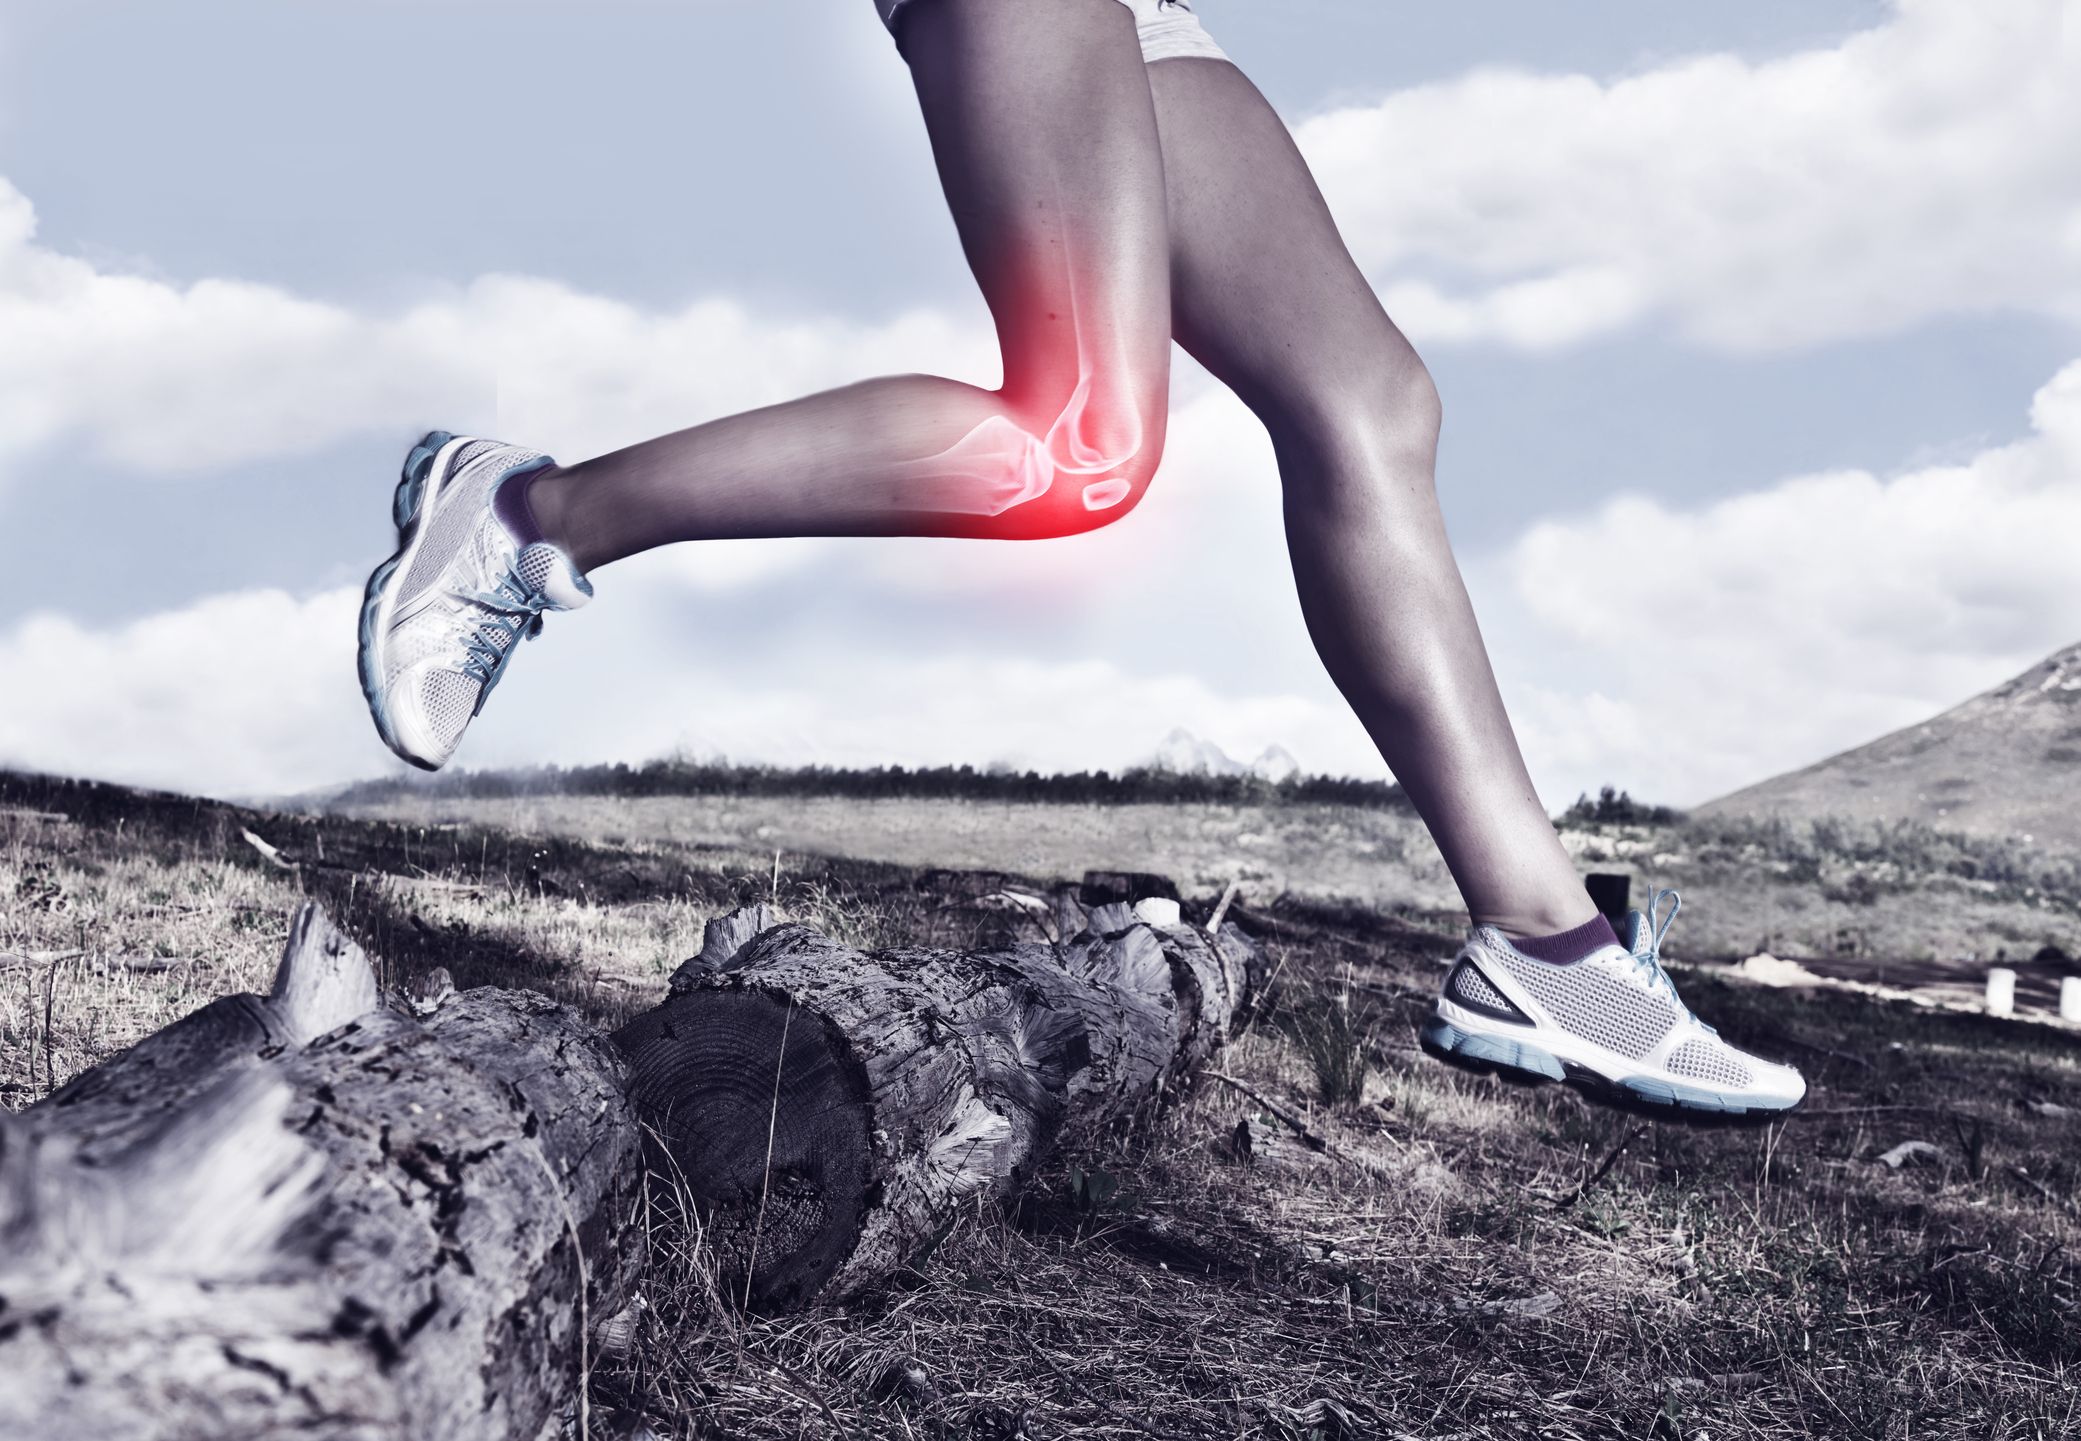 6 Knee Pain Causes That Have (Almost) Nothing to Do With Getting Old